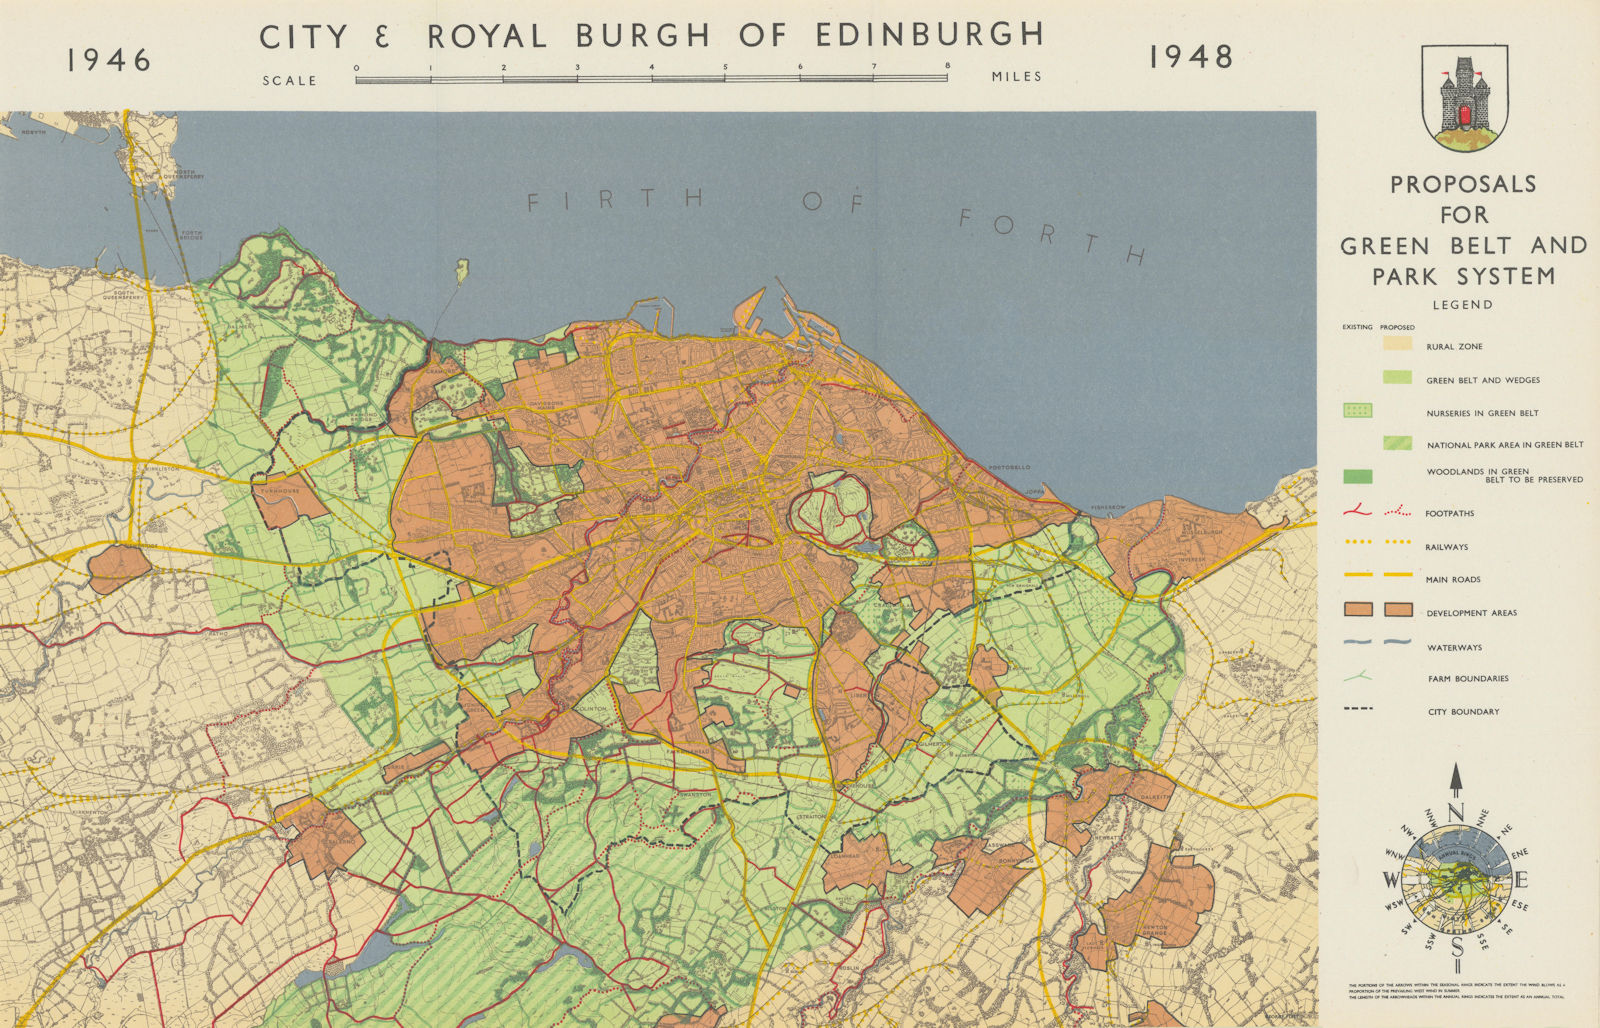 EDINBURGH. Proposals for Green Belt and Park System. ABERCROMBIE 1949 old map